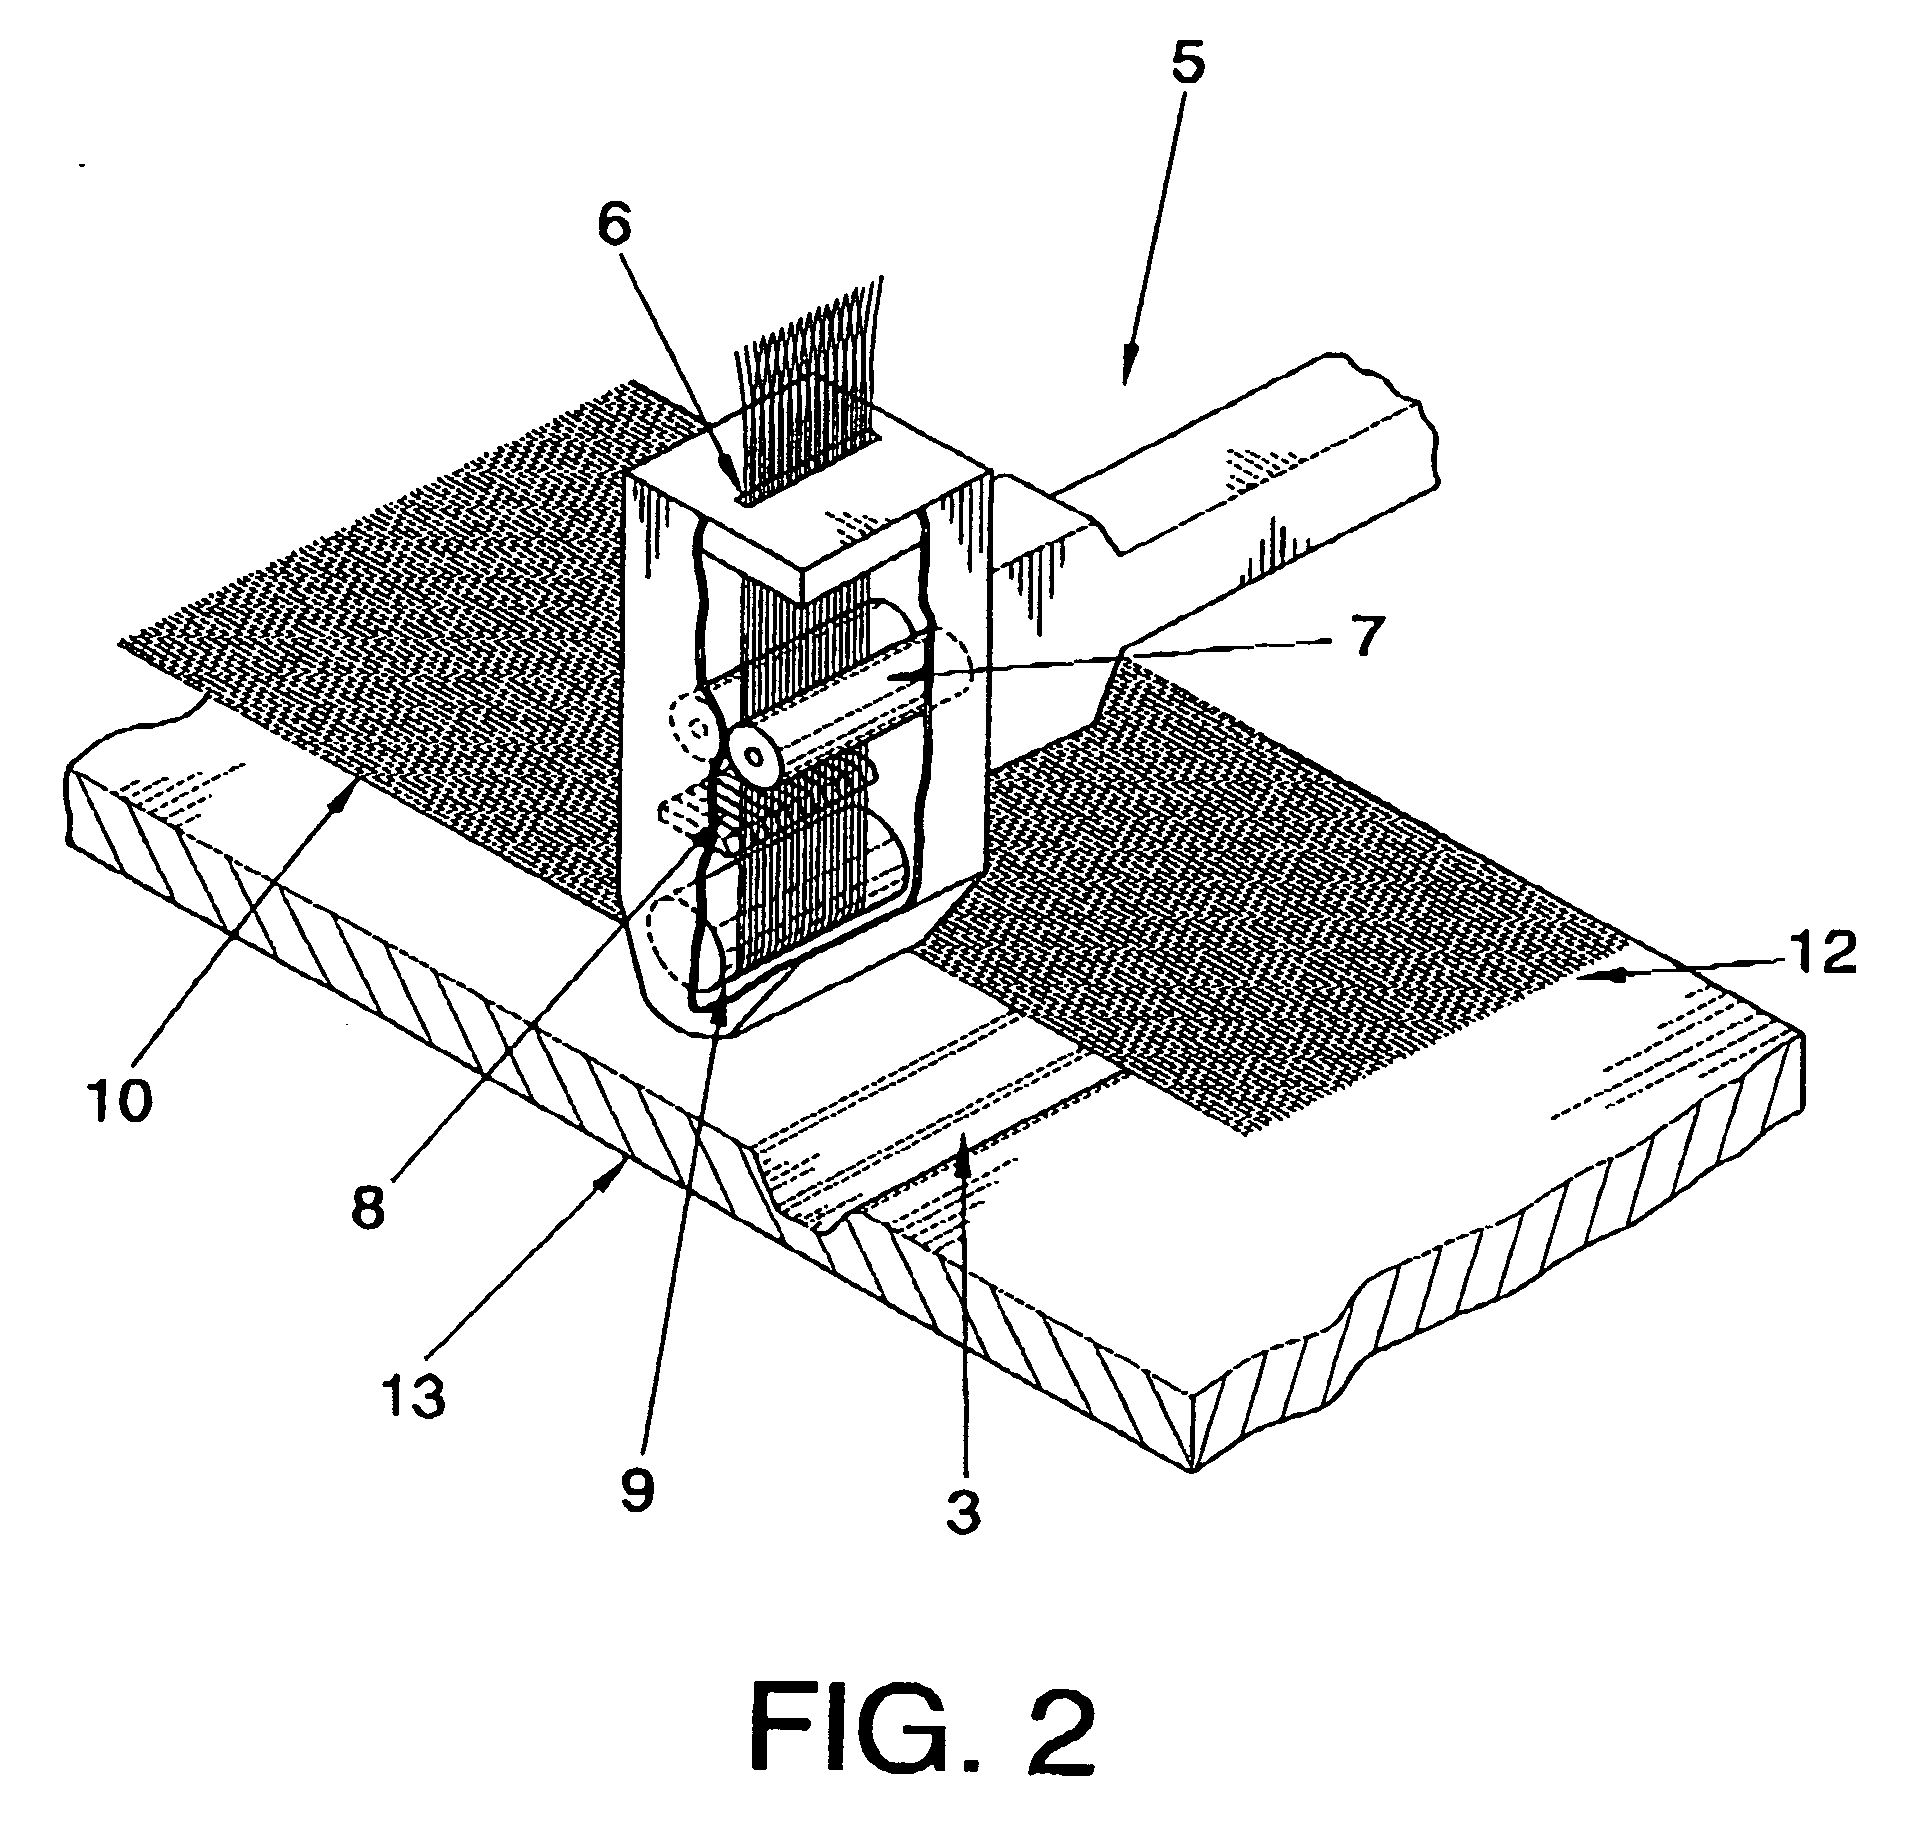 Manufacturing method of a complex geometry panel in prepreg composite material